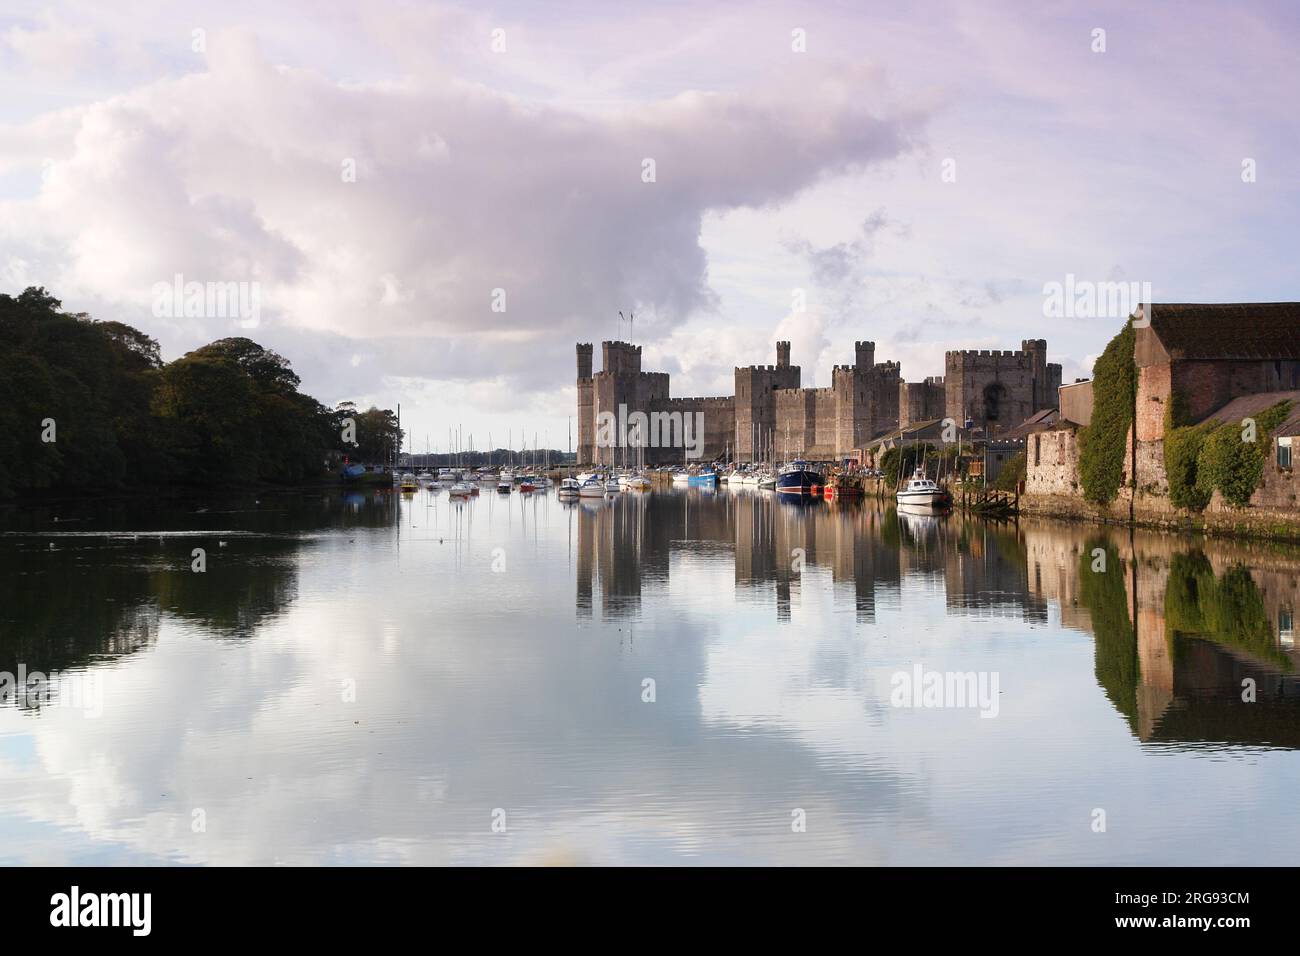 An atmospheric view of Caernarfon (Caernarvon) Castle in Gwynedd, North Wales, with numerous boats on the water.  The castle was built by the English King Edward I from around 1283, on the site of a Roman fortress and Norman motte. Stock Photo